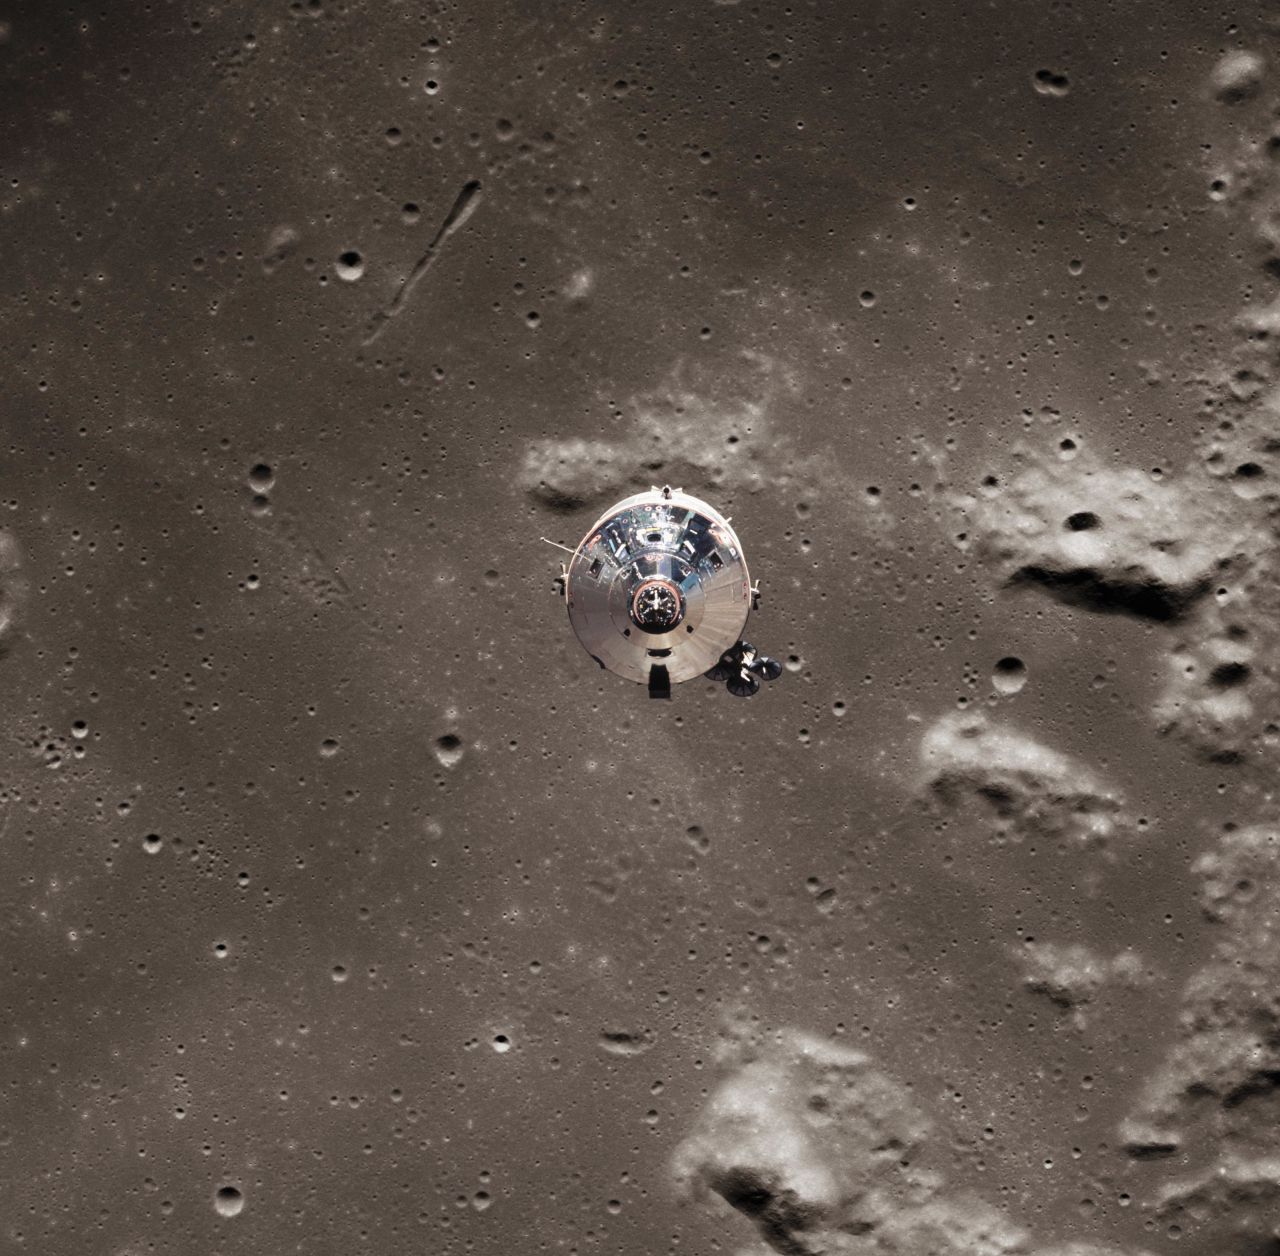 The Apollo 11 spacecraft consisted of a command module, Columbia, and a lunar module, Eagle. This photo, taken from the Eagle lunar module, shows the Columbia command module pulling away near the lunar surface.